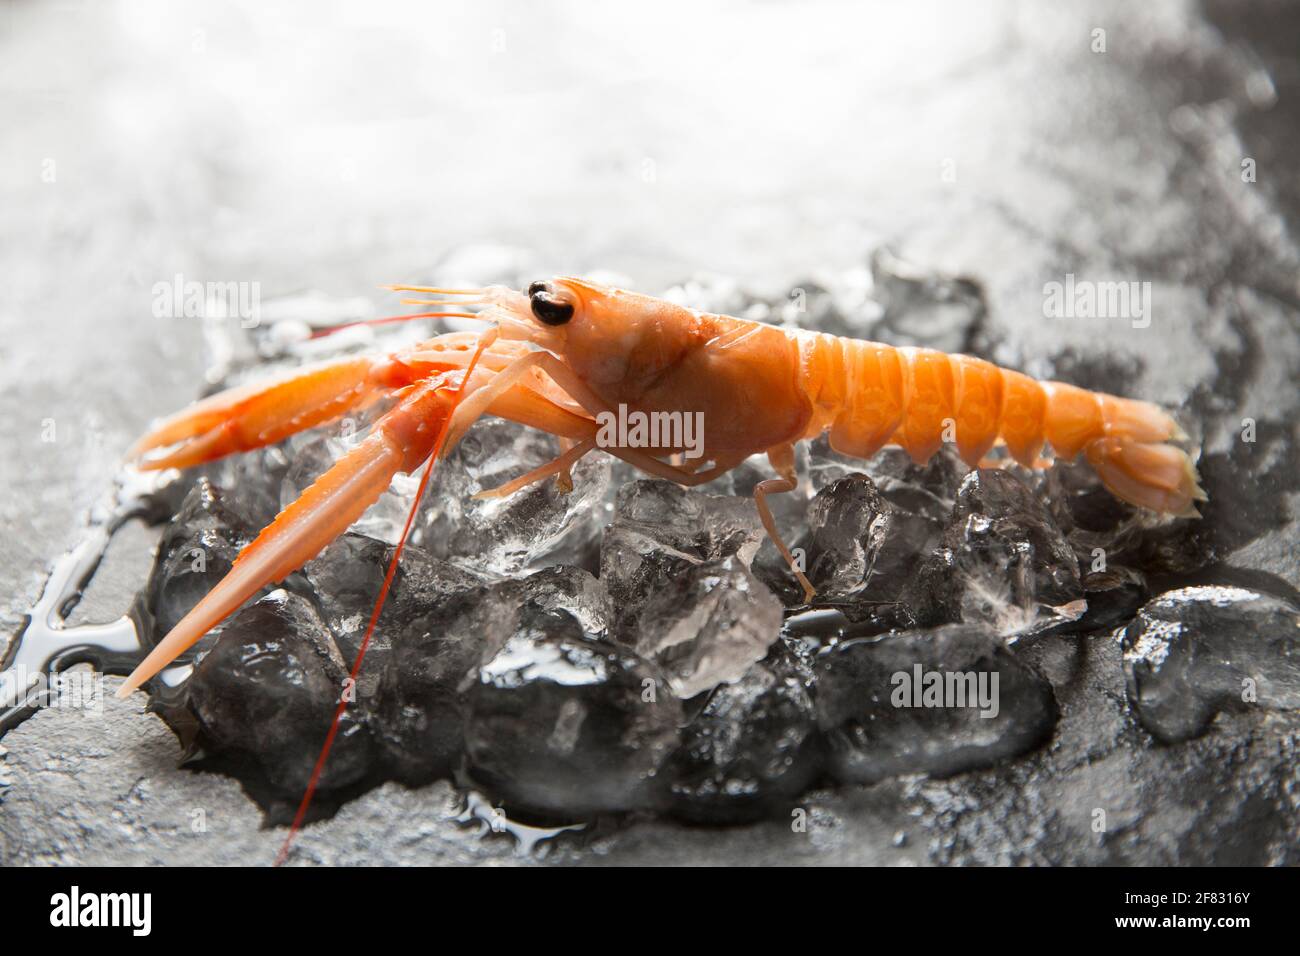 Raw Langoustines, or Dublin Bay prawns, Nephrops norvegicus, that were caught in the North East Atlantic that have been bought from a supermarket in t Stock Photo